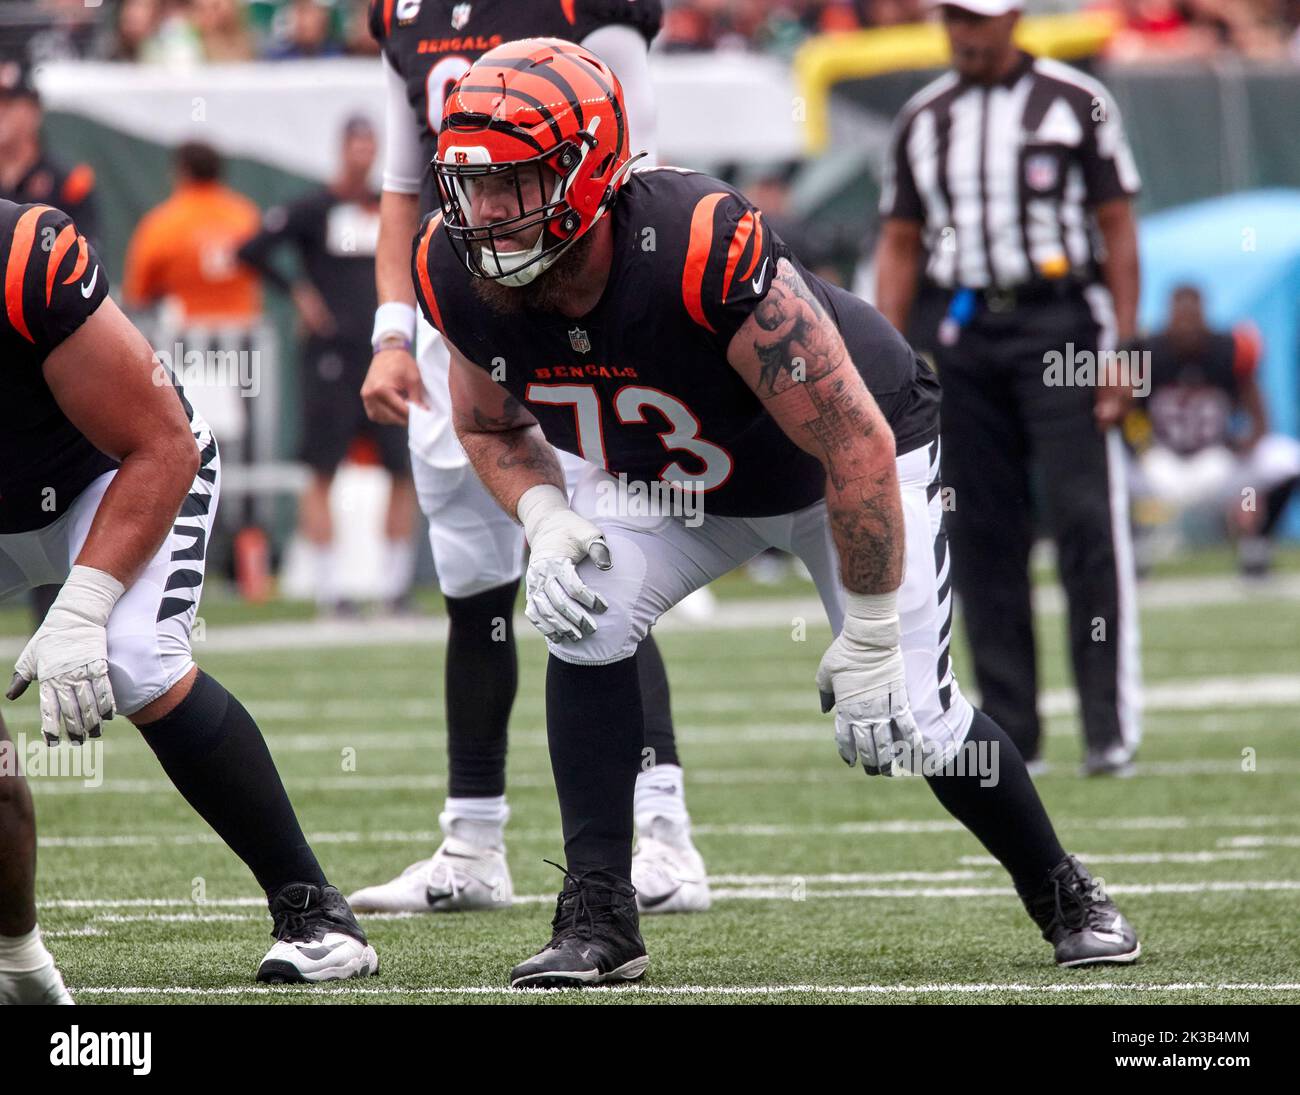 East Rutherford, New Jersey, USA. 26th Sep, 2022. Cincinnati Bengals offensive tackle Jonah Williams (73) during a NFL game at MetLife Stadium in East Rutherford, New Jersey on Sunday September 25, 2022. Cincinnati Bengals defeated the New York Jets 27-12. Duncan Williams/CSM/Alamy Live News Stock Photo